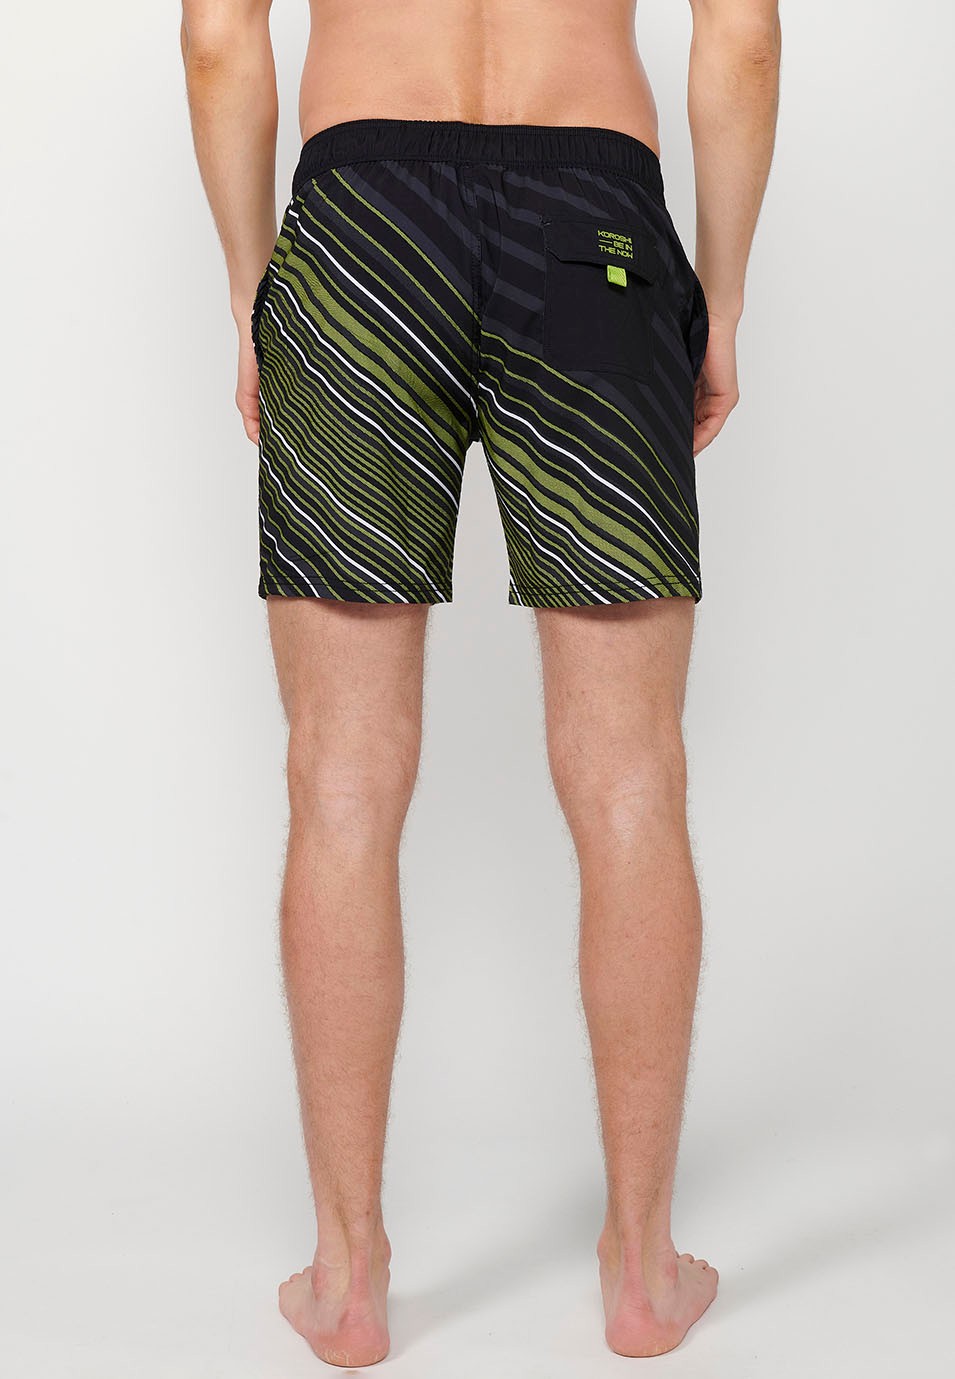 Printed short swimsuit with adjustable waist with drawstring and back pocket and one interior pocket in Lime Color for Men 7